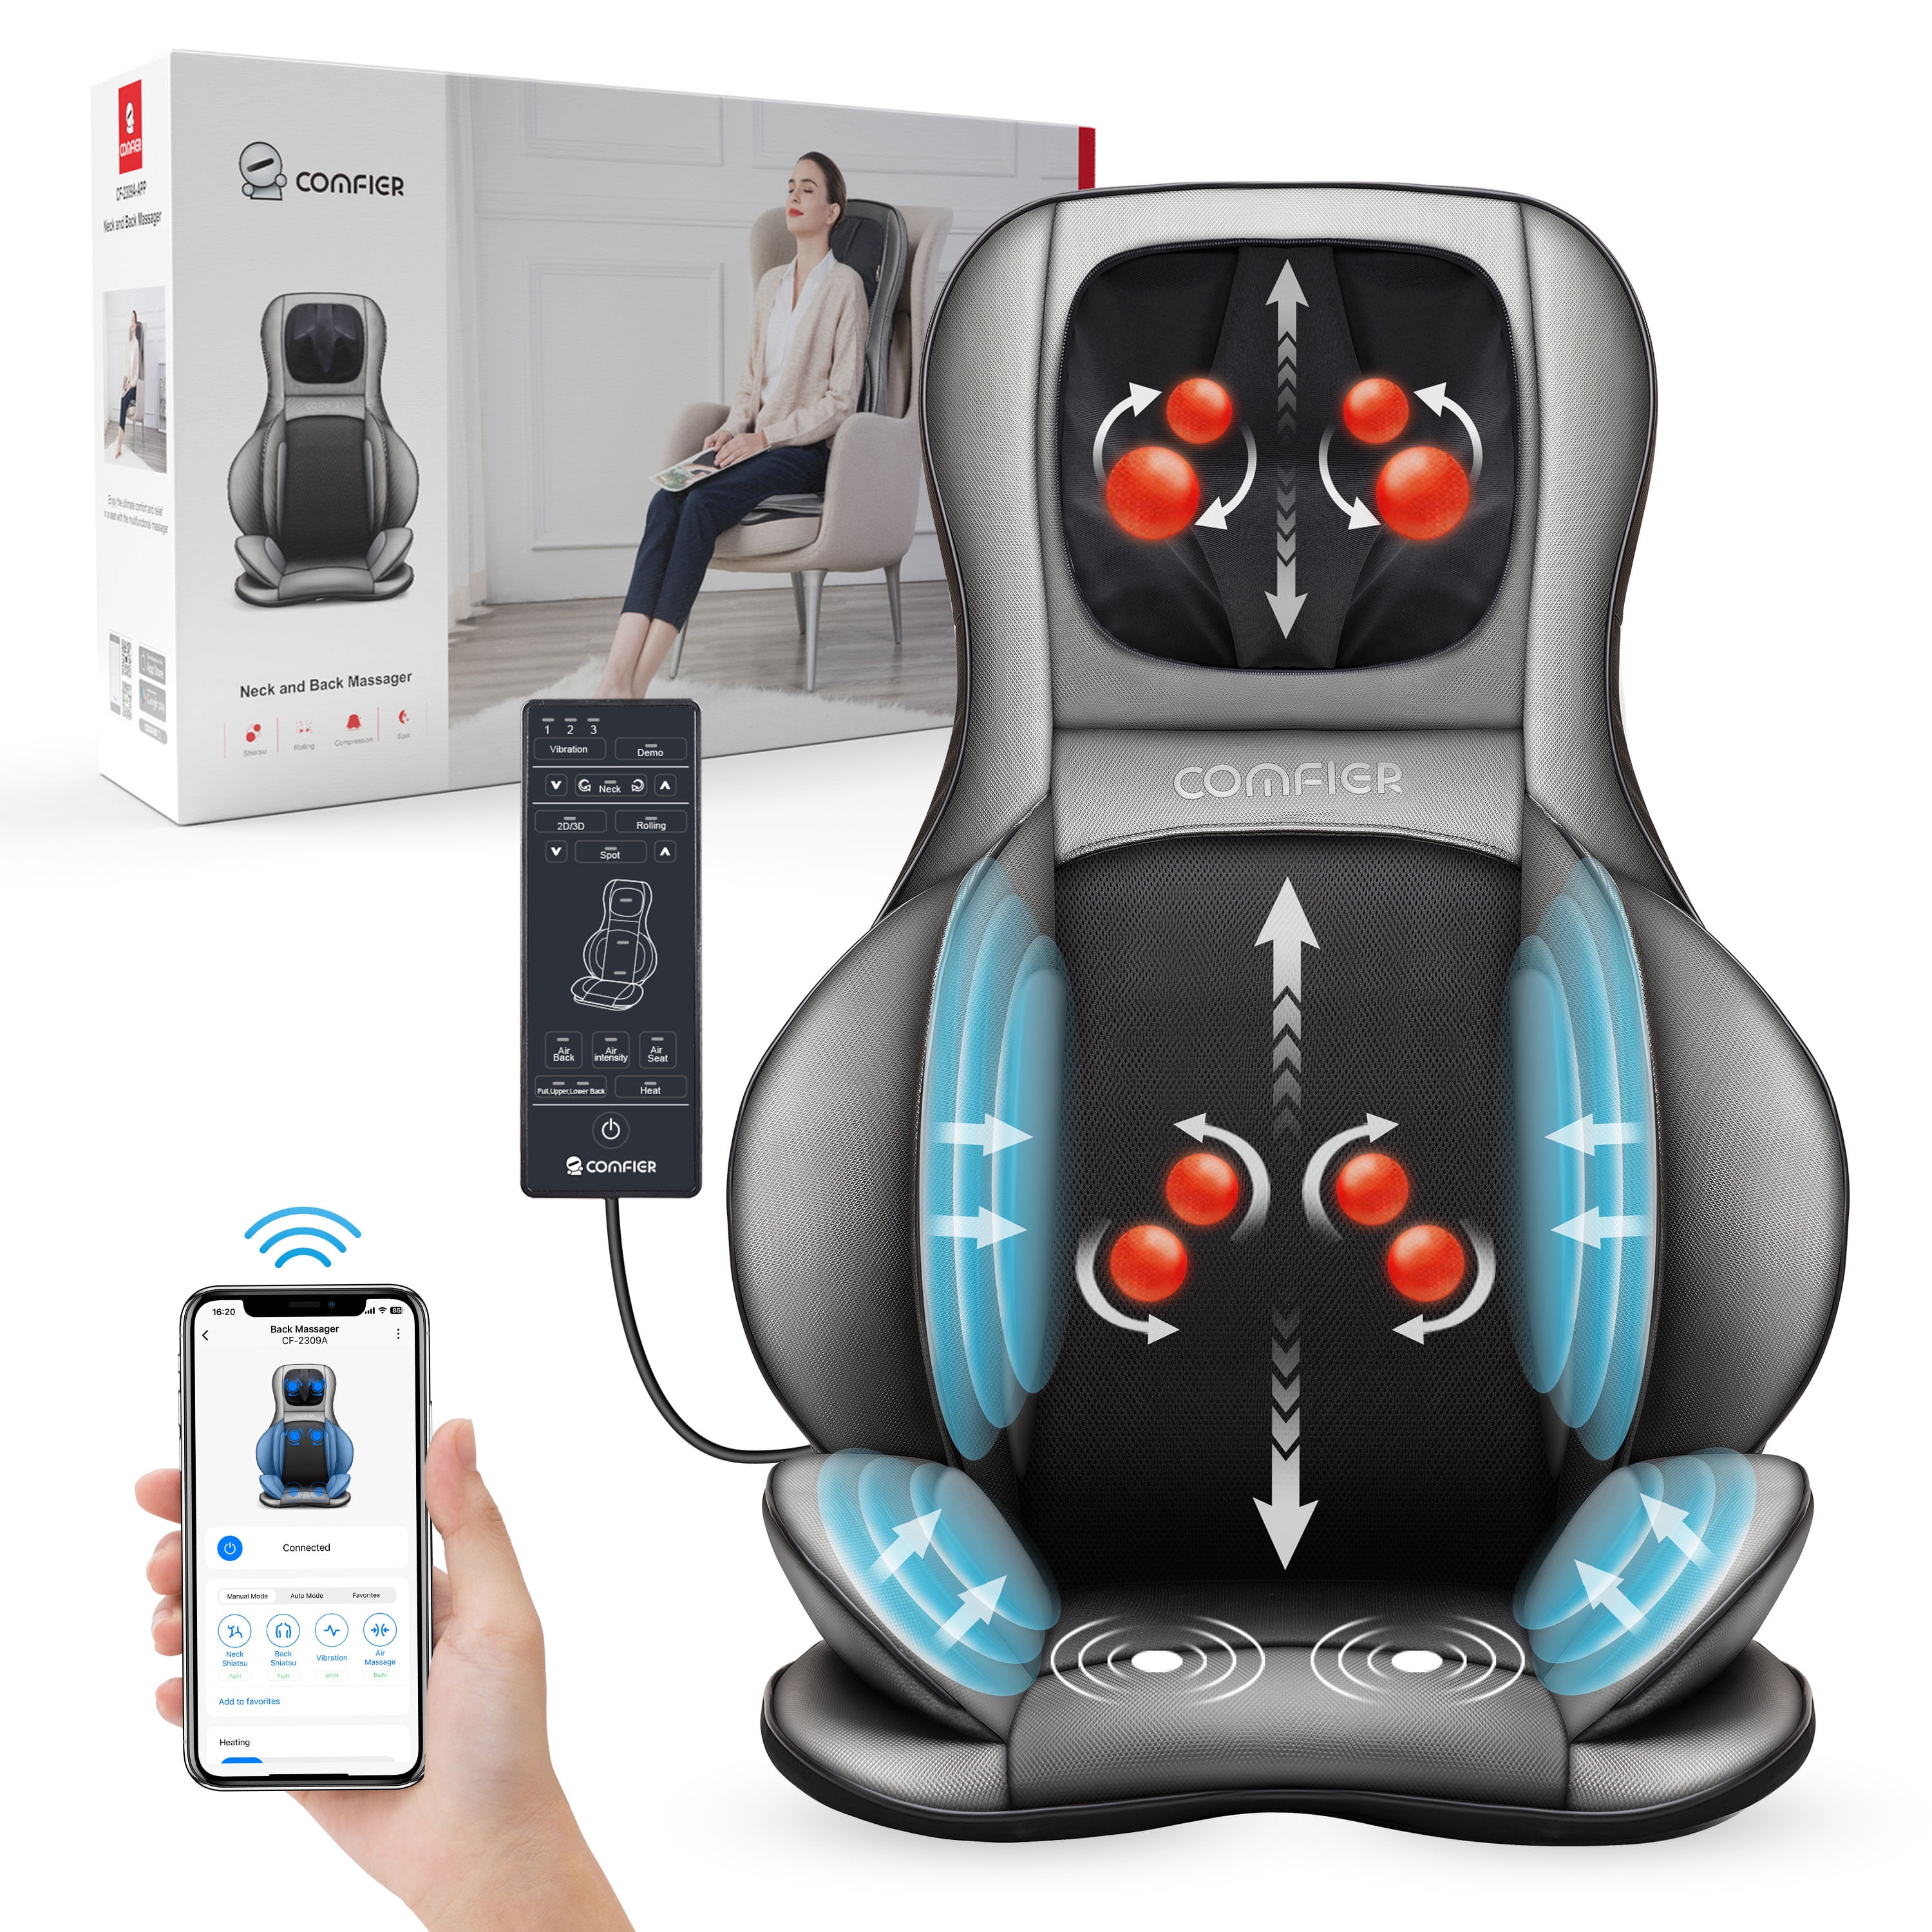  COMFIER Massage Seat Cushion with Heat,10 Vibration Motors Seat  Warmer, Back Massager for Chair, Massage Chair Pad for Back Ideal Gifts for  Women,Men,Black : Health & Household